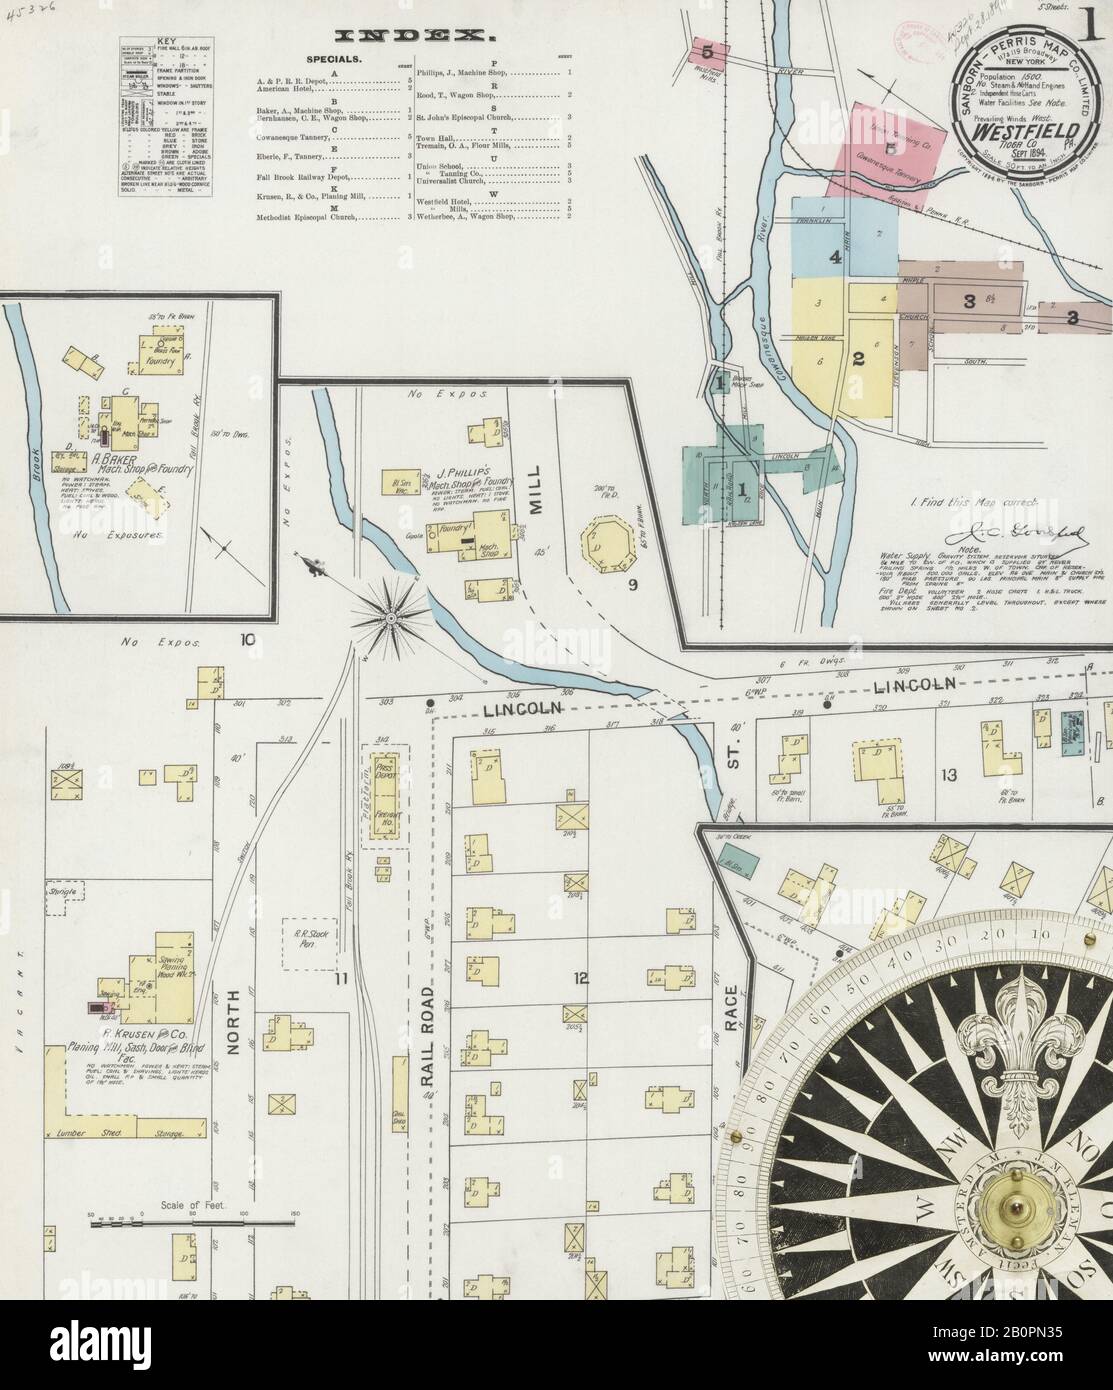 Image 1 of Sanborn Fire Insurance Map from Westfield, Tioga County, Pennsylvania. Sep 1894. 5 Sheet(s), America, street map with a Nineteenth Century compass Stock Photo